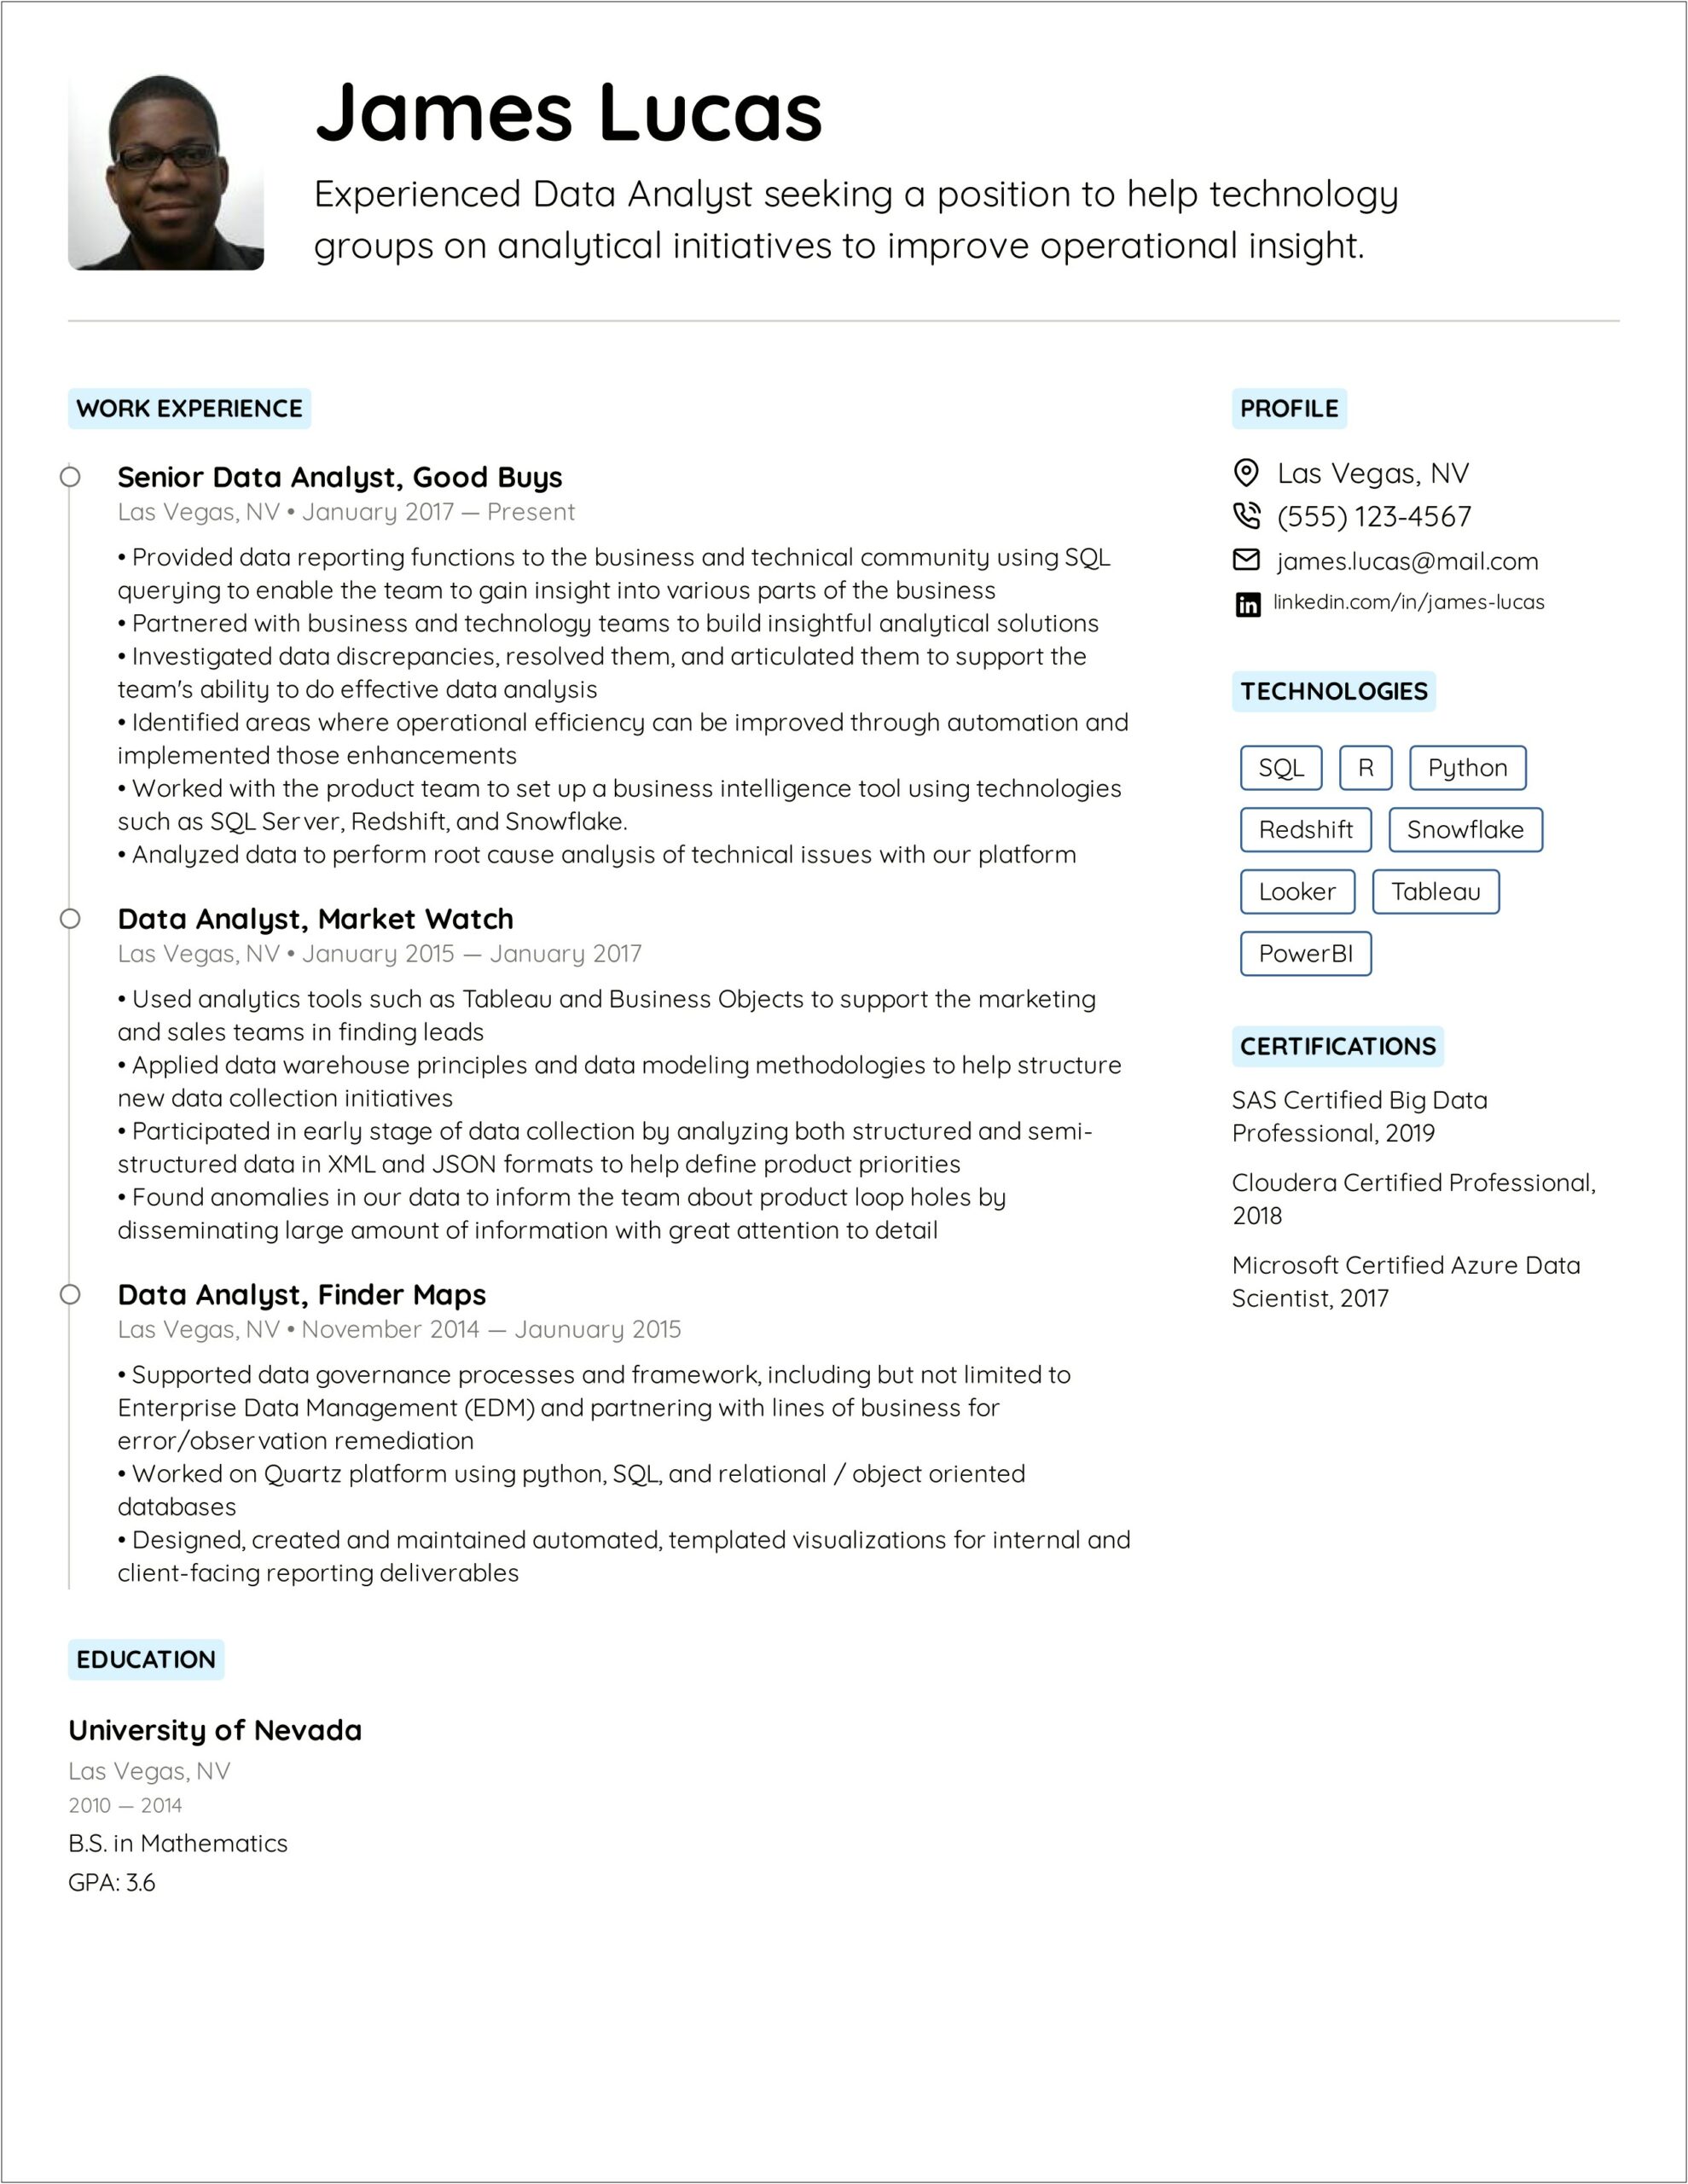 Sample Resume With Pursuing Degree